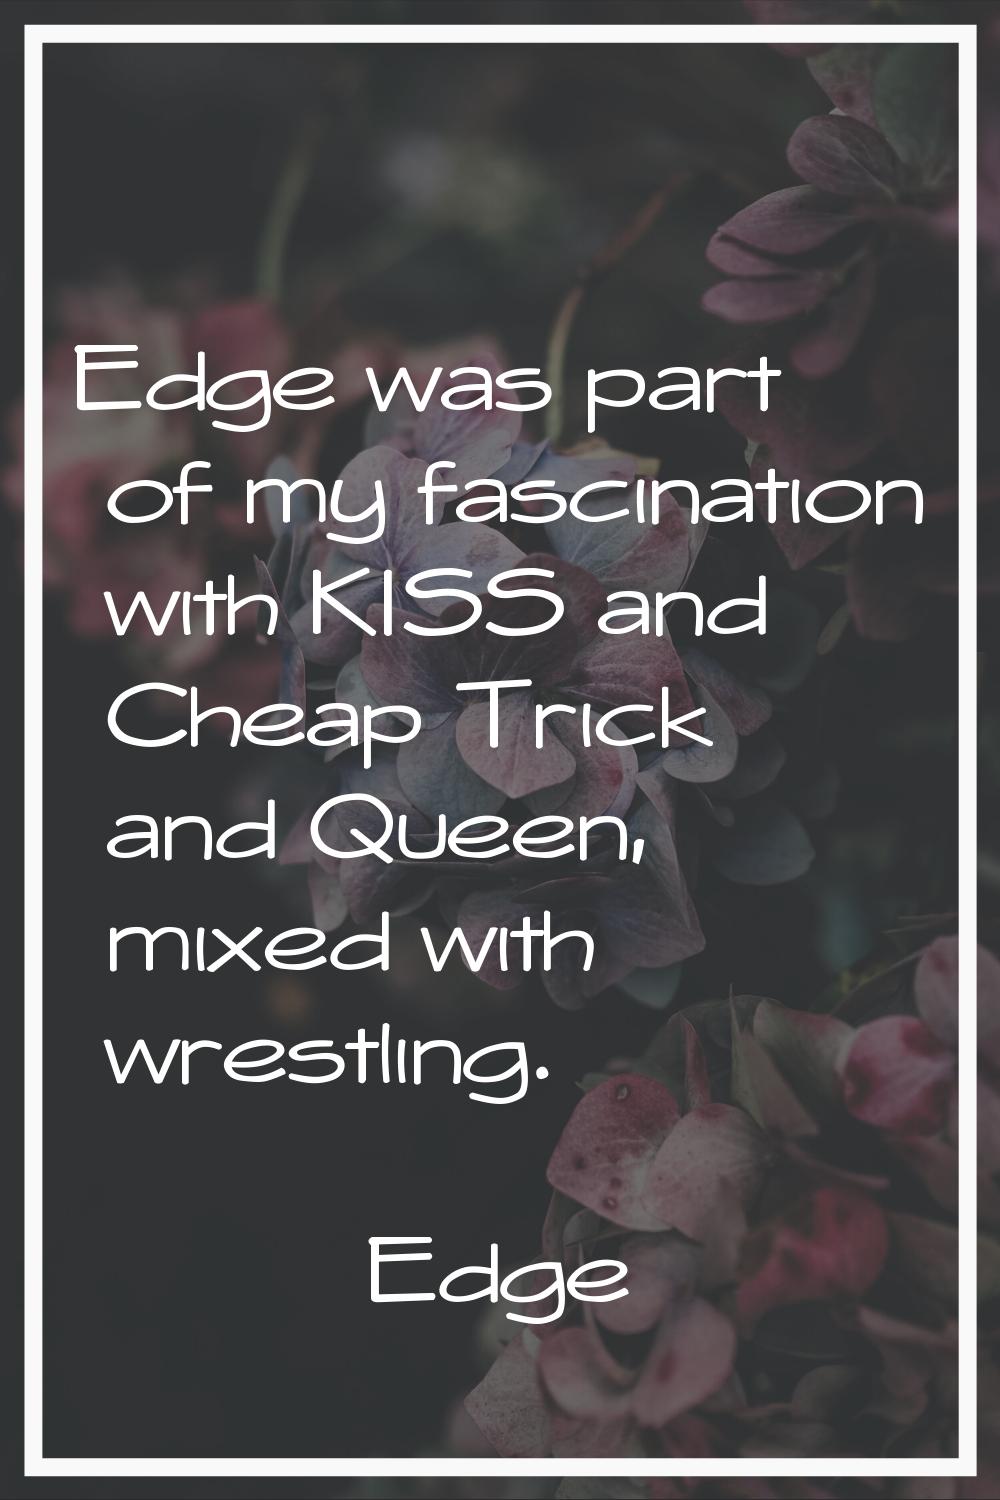 Edge was part of my fascination with KISS and Cheap Trick and Queen, mixed with wrestling.